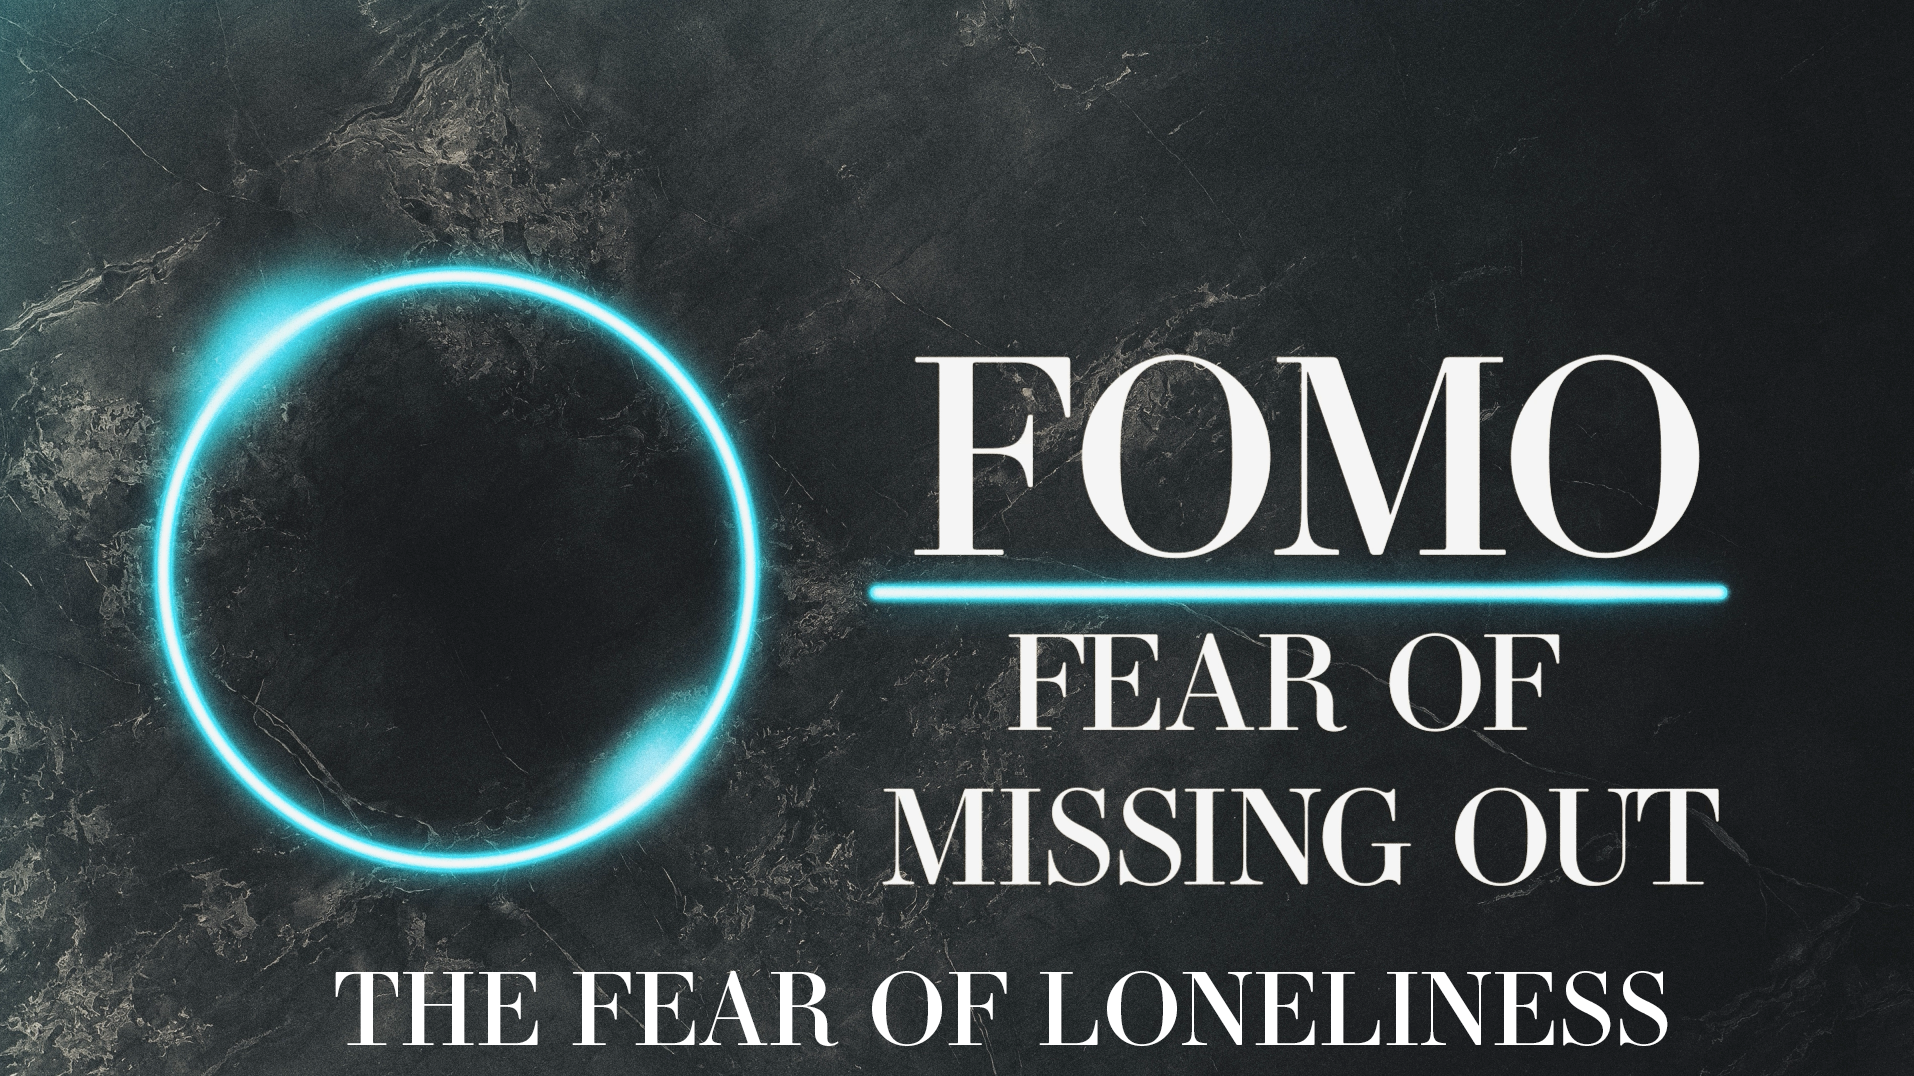 FOMO PART 2 "The Fear of Loneliness" (Traditional Service)